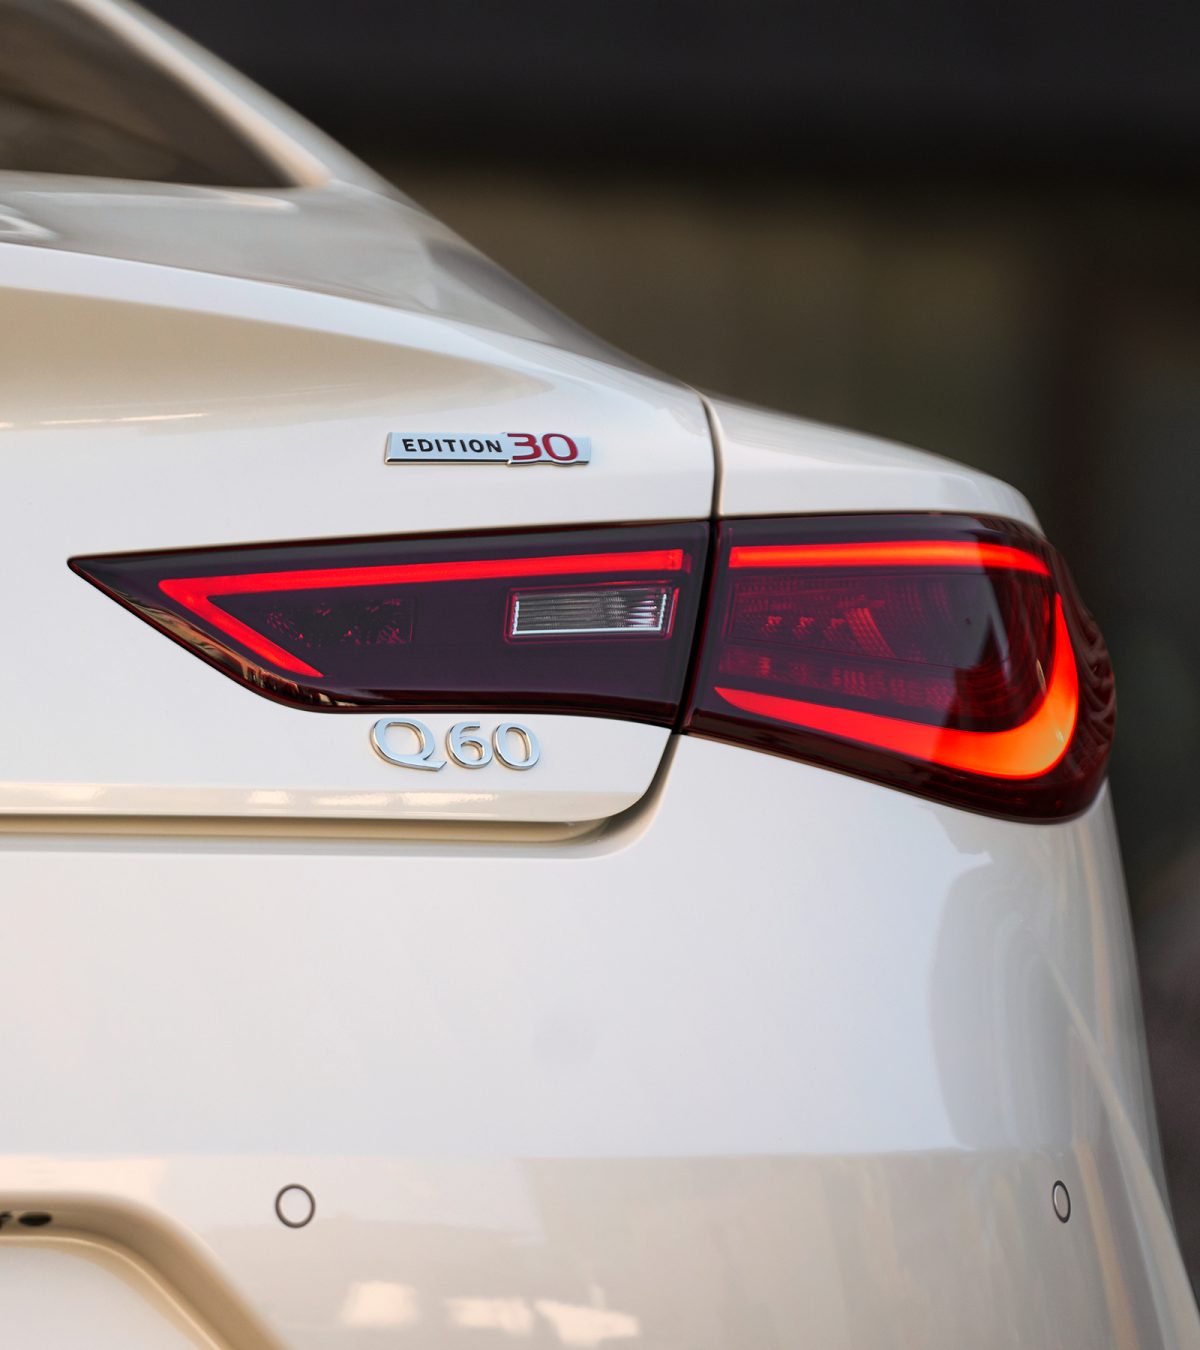 Exterior Rear Closeup View Of 2020 INFINITI Q60 EDITION 30 Led Tail Lights